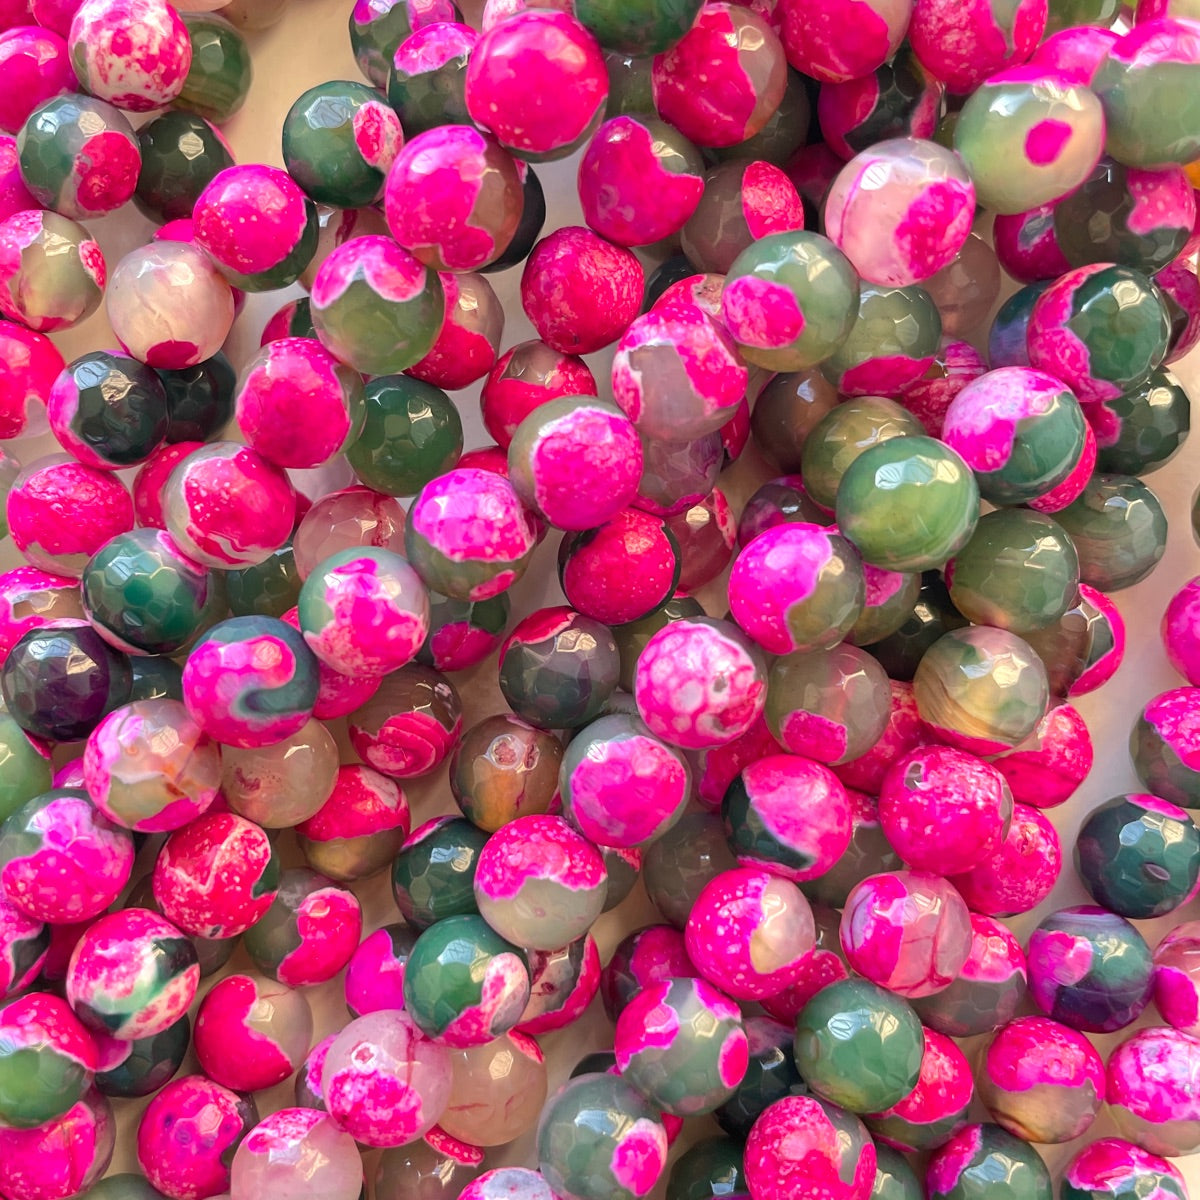 2 Strands/lot 10mm Colorful Hot Pink/Fuchsia Blue Purple Green Fire Agate Faceted Stone Beads Hot Pink Green Stone Beads Faceted Agate Beads New Beads Arrivals Charms Beads Beyond